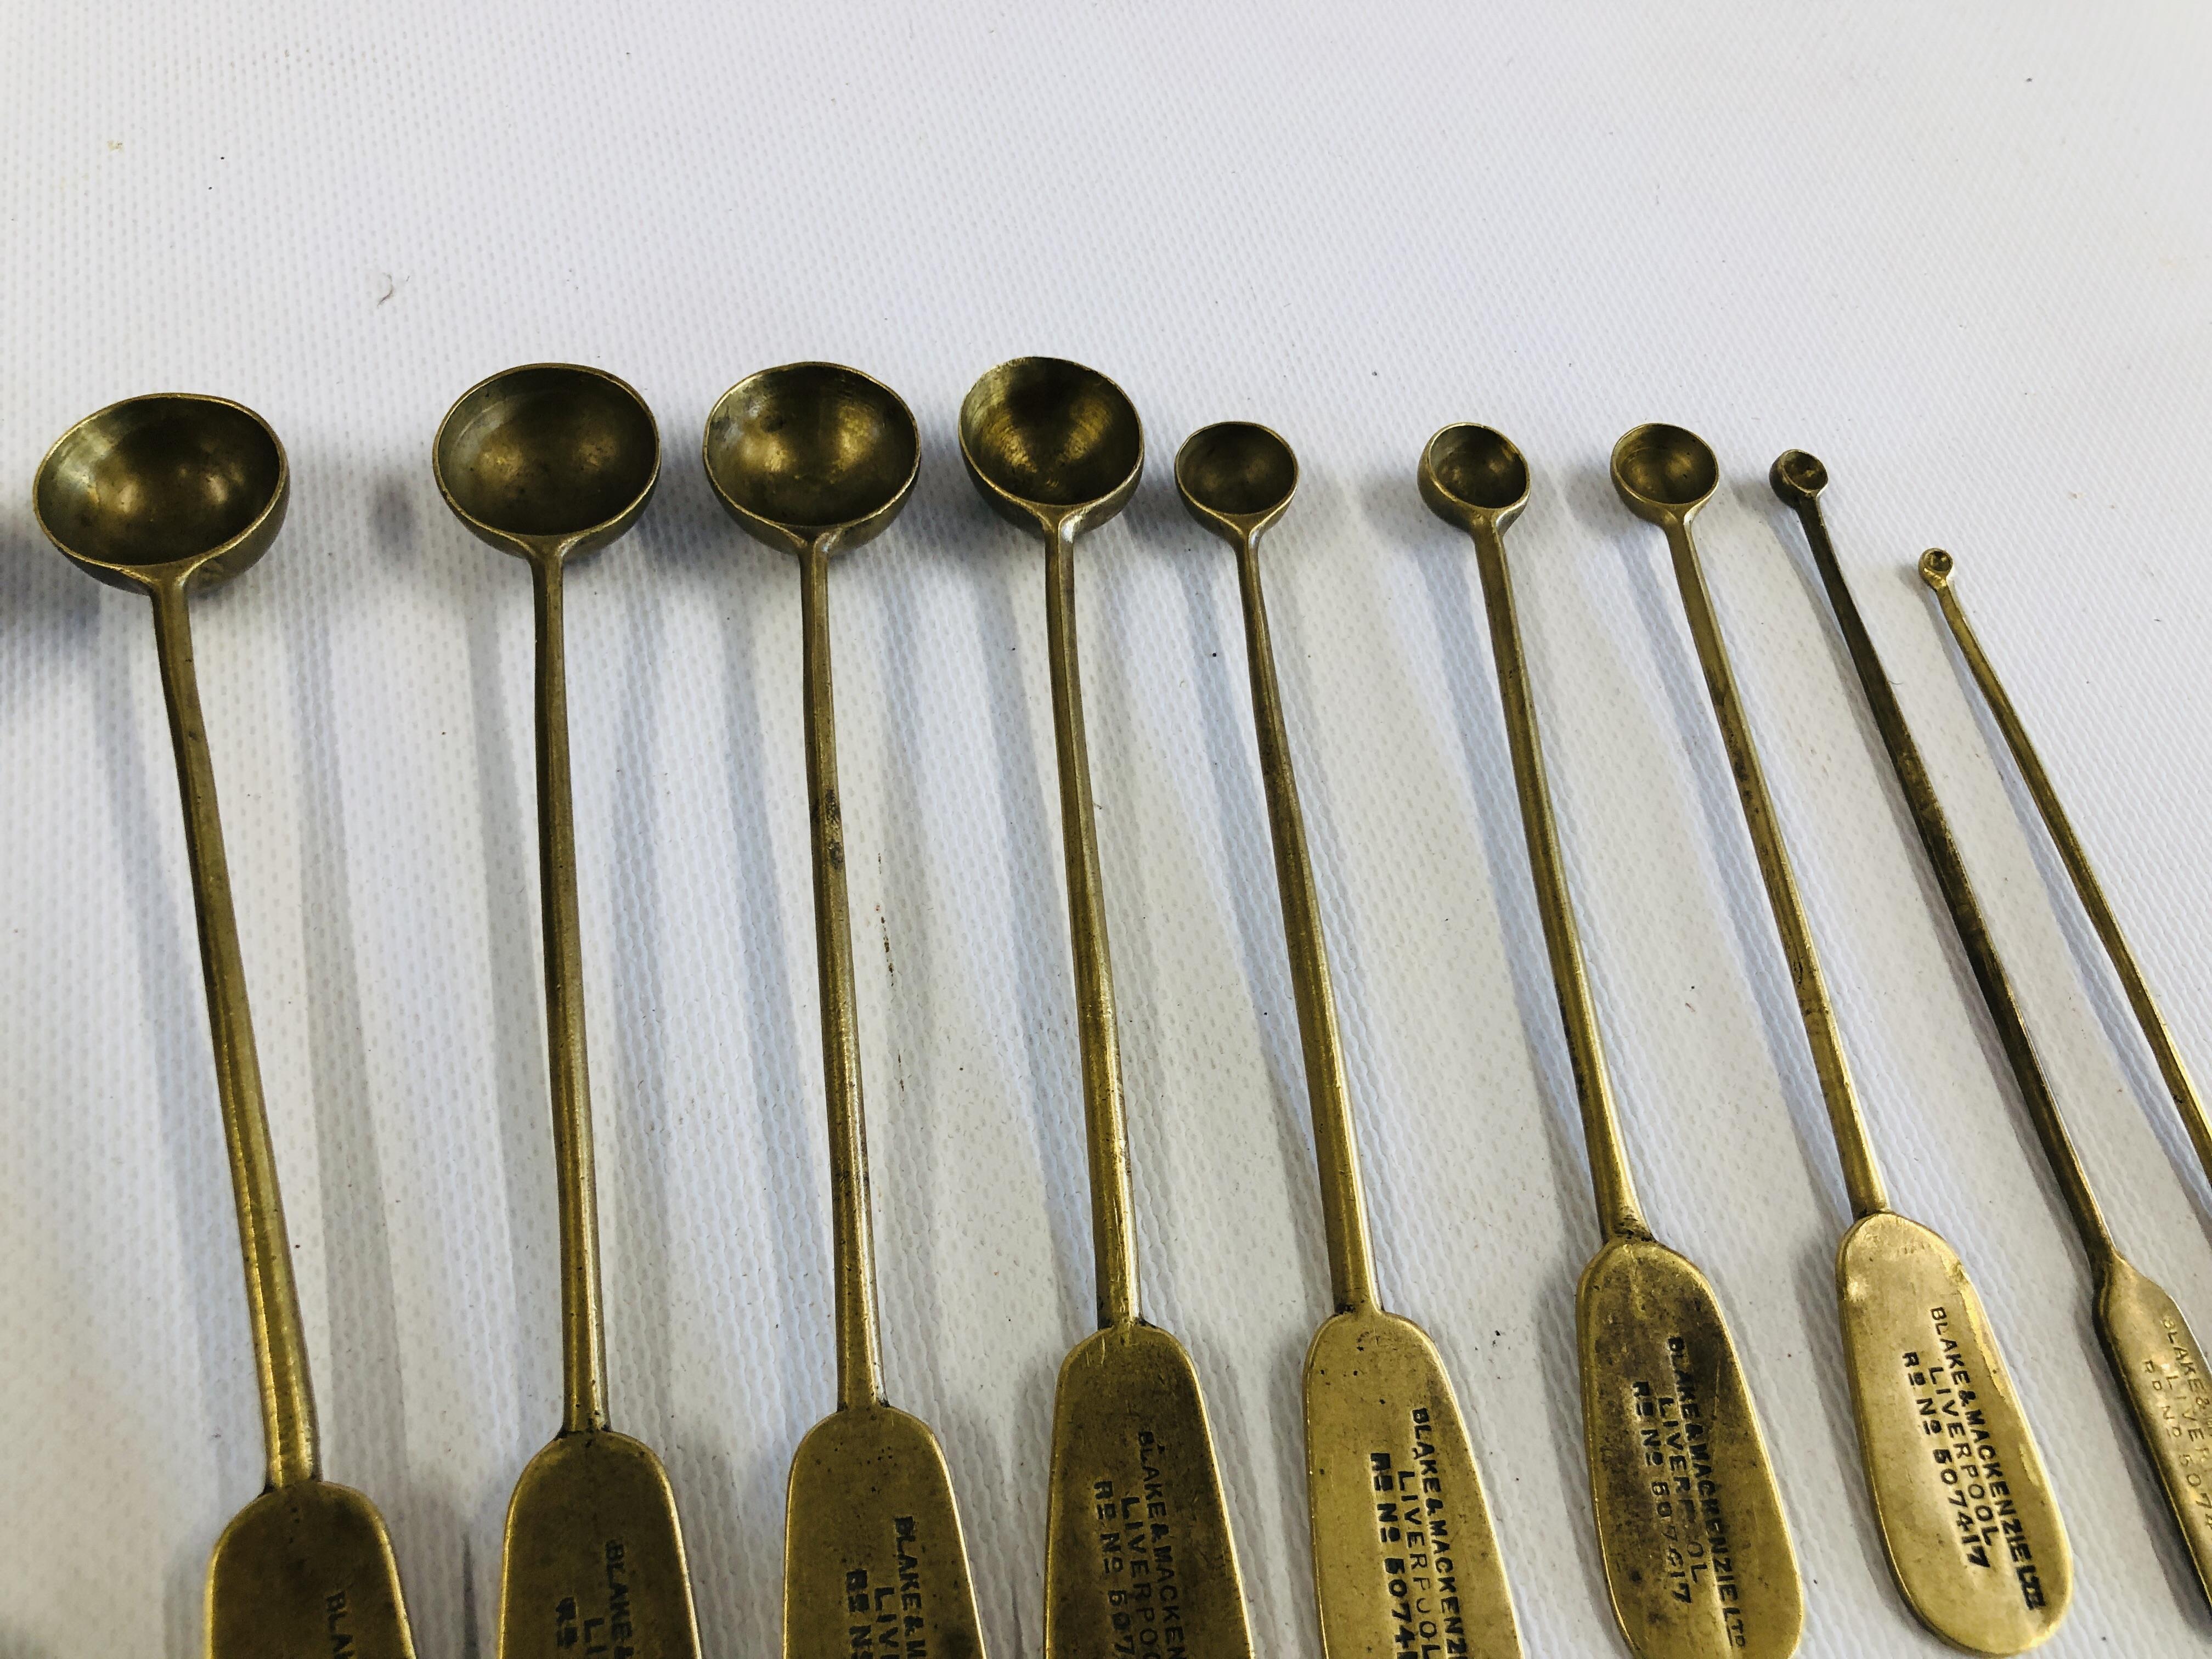 A COLLECTION OF 19 VINTAGE BRASS SEED MEASURES ALL IMPRESSED WITH "BLAKE & MACKENZIE LTD LIVERPOOL" - Image 5 of 10